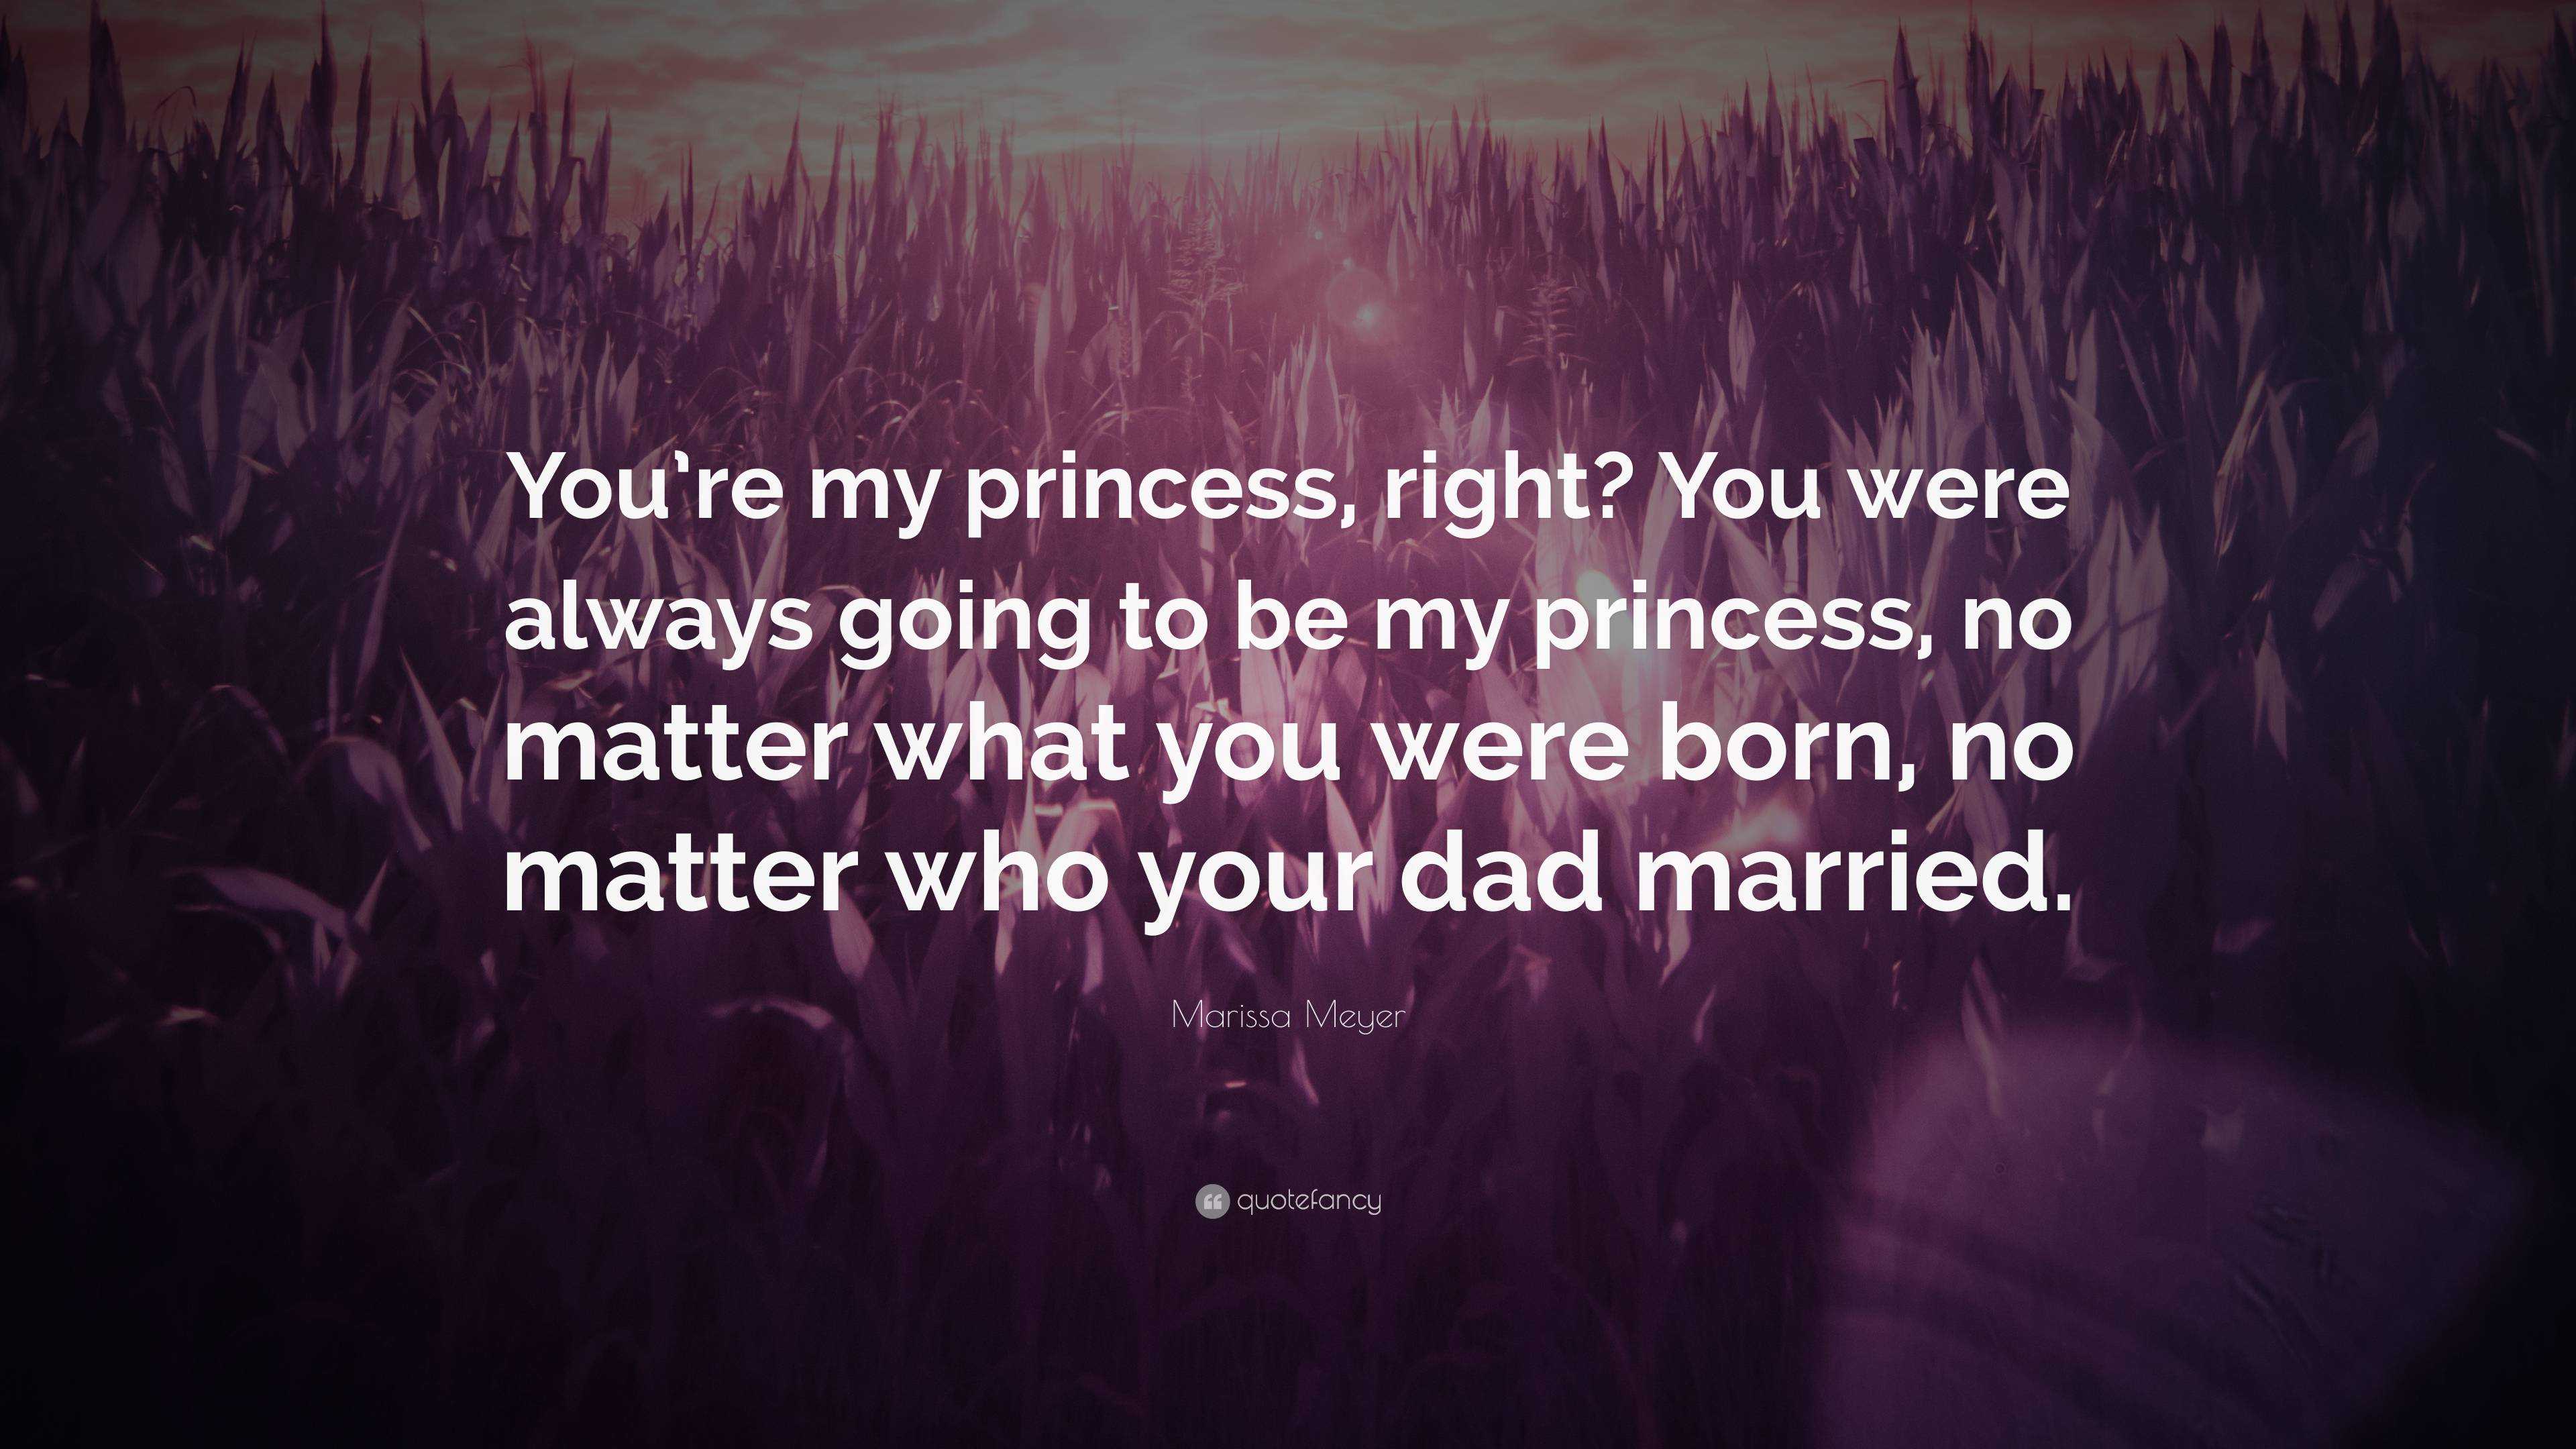 Marissa Meyer Quote: “You're my princess, right? You were always going to  be my princess, no matter what you were born, no matter who your dad...”